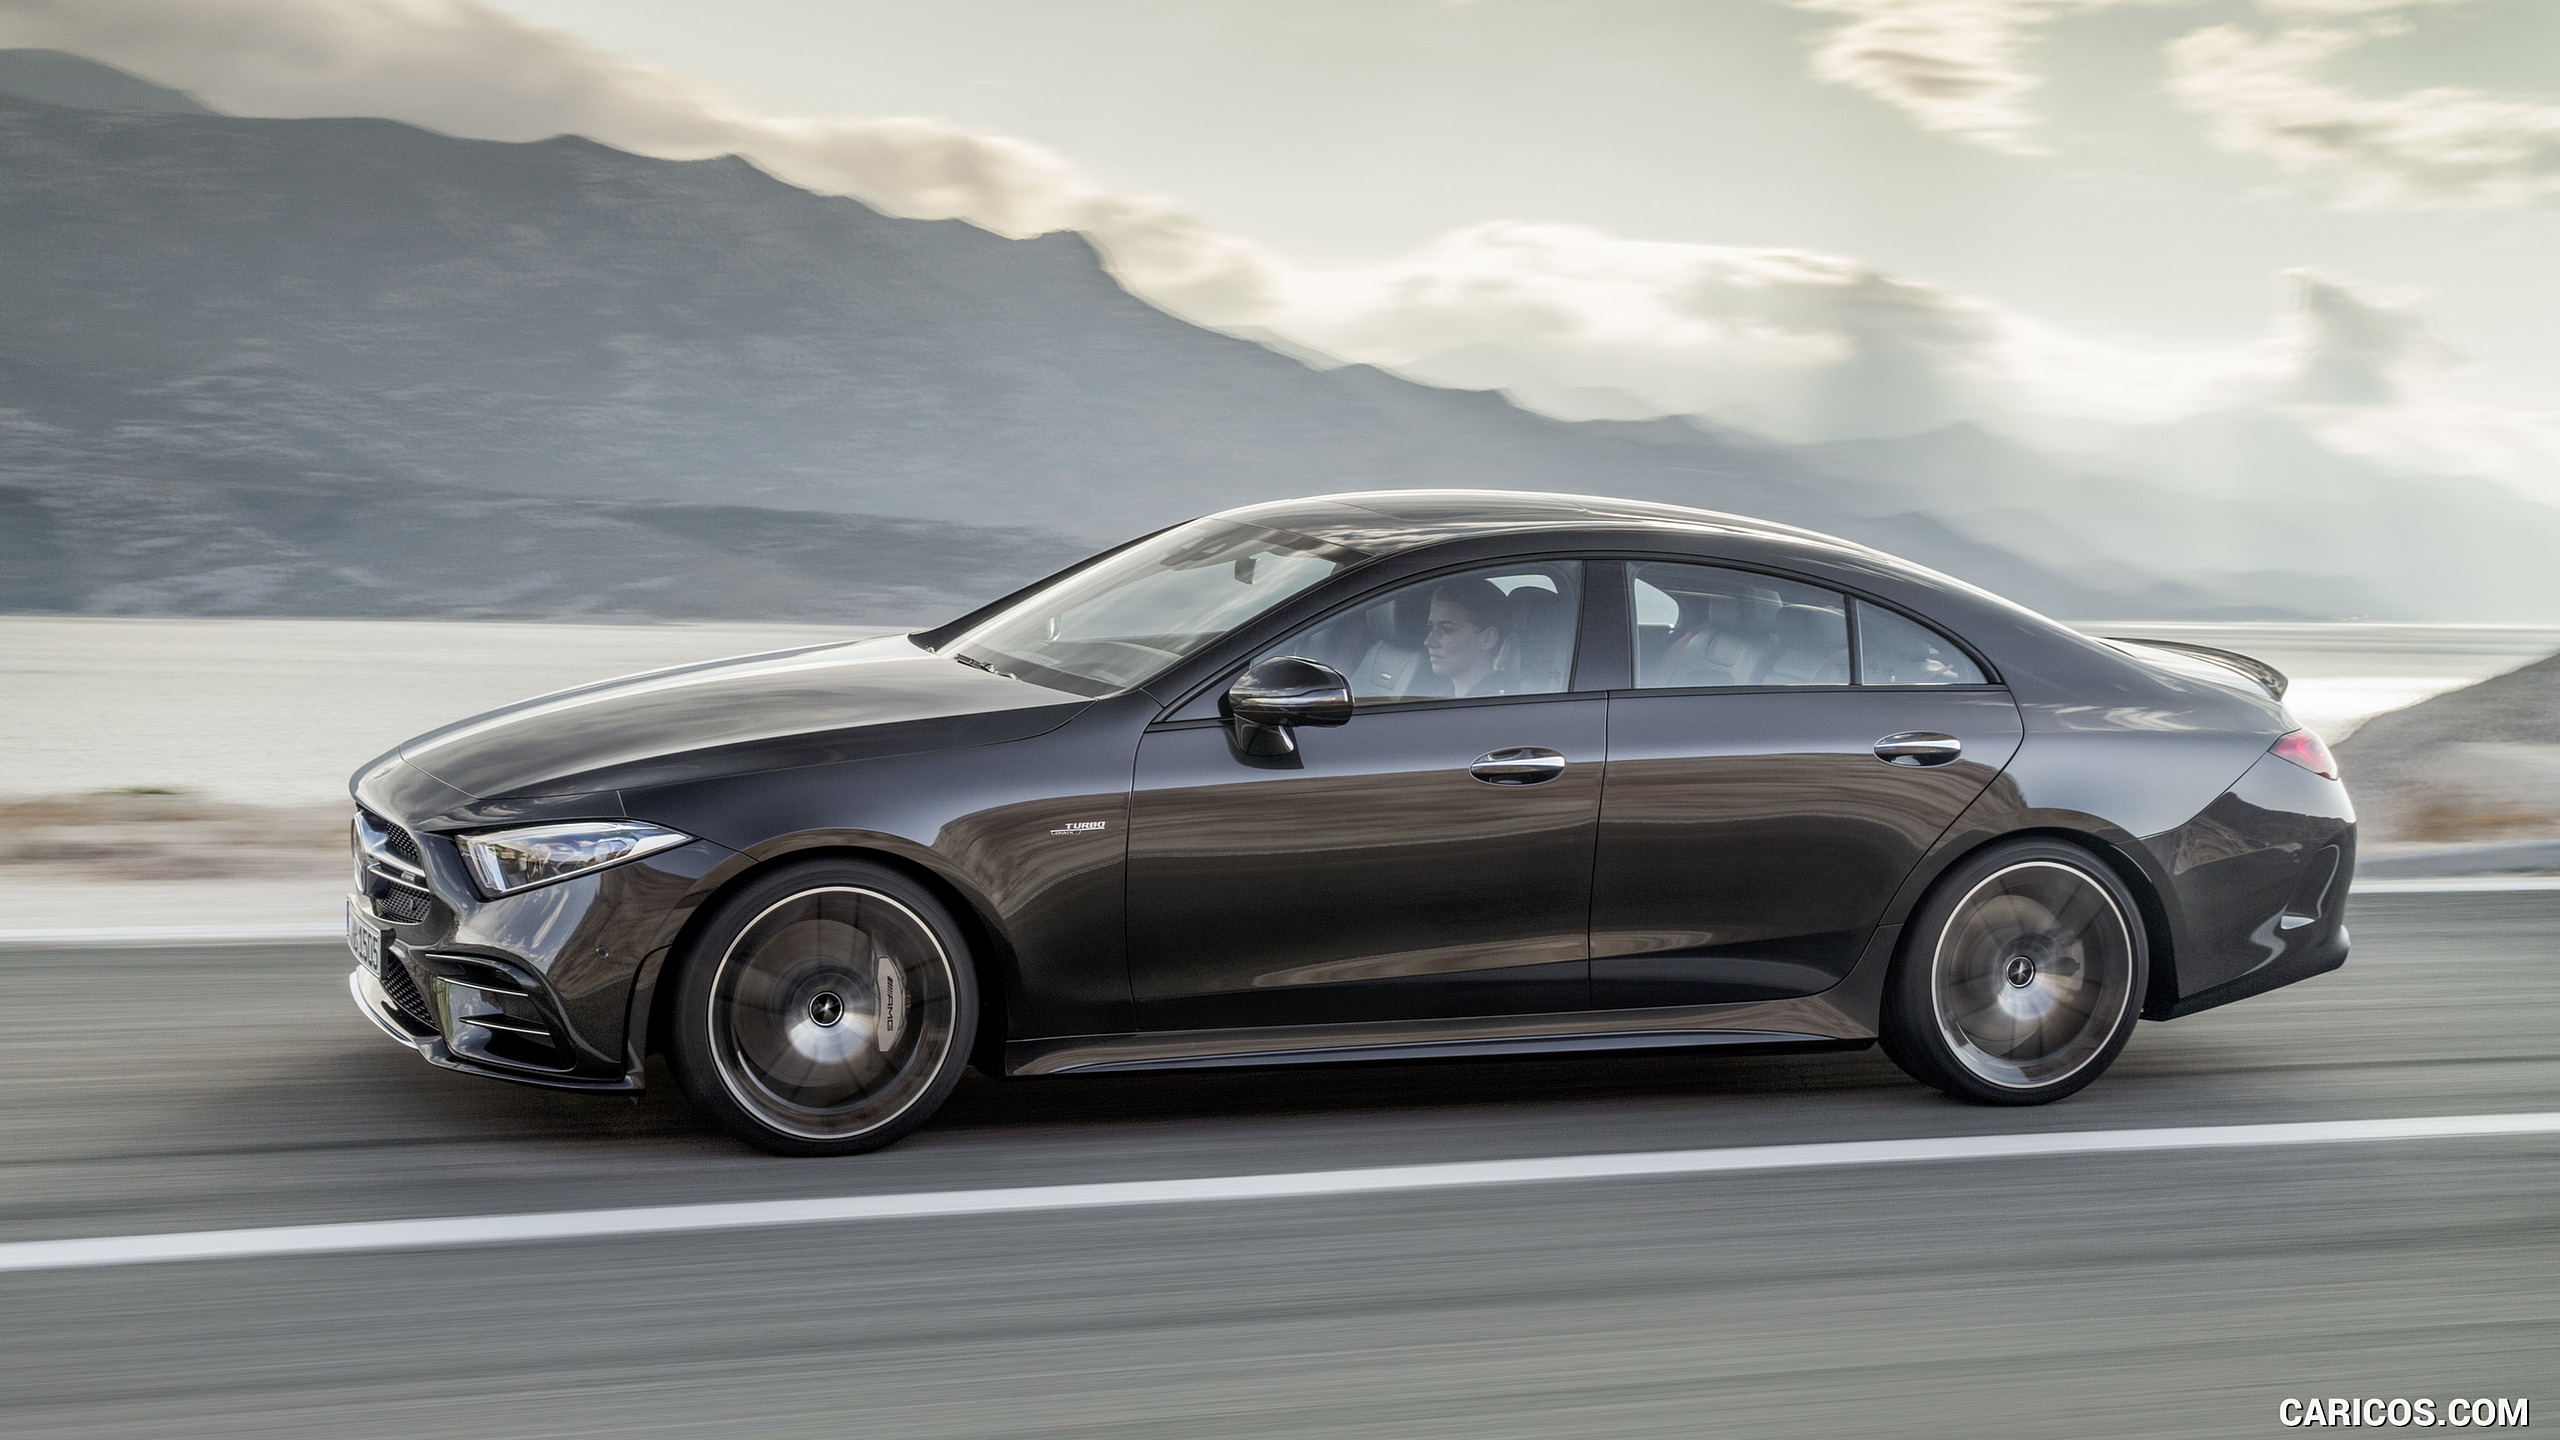 2019 Mercedes-AMG CLS 53 4MATIC+ - Side, #6 of 84